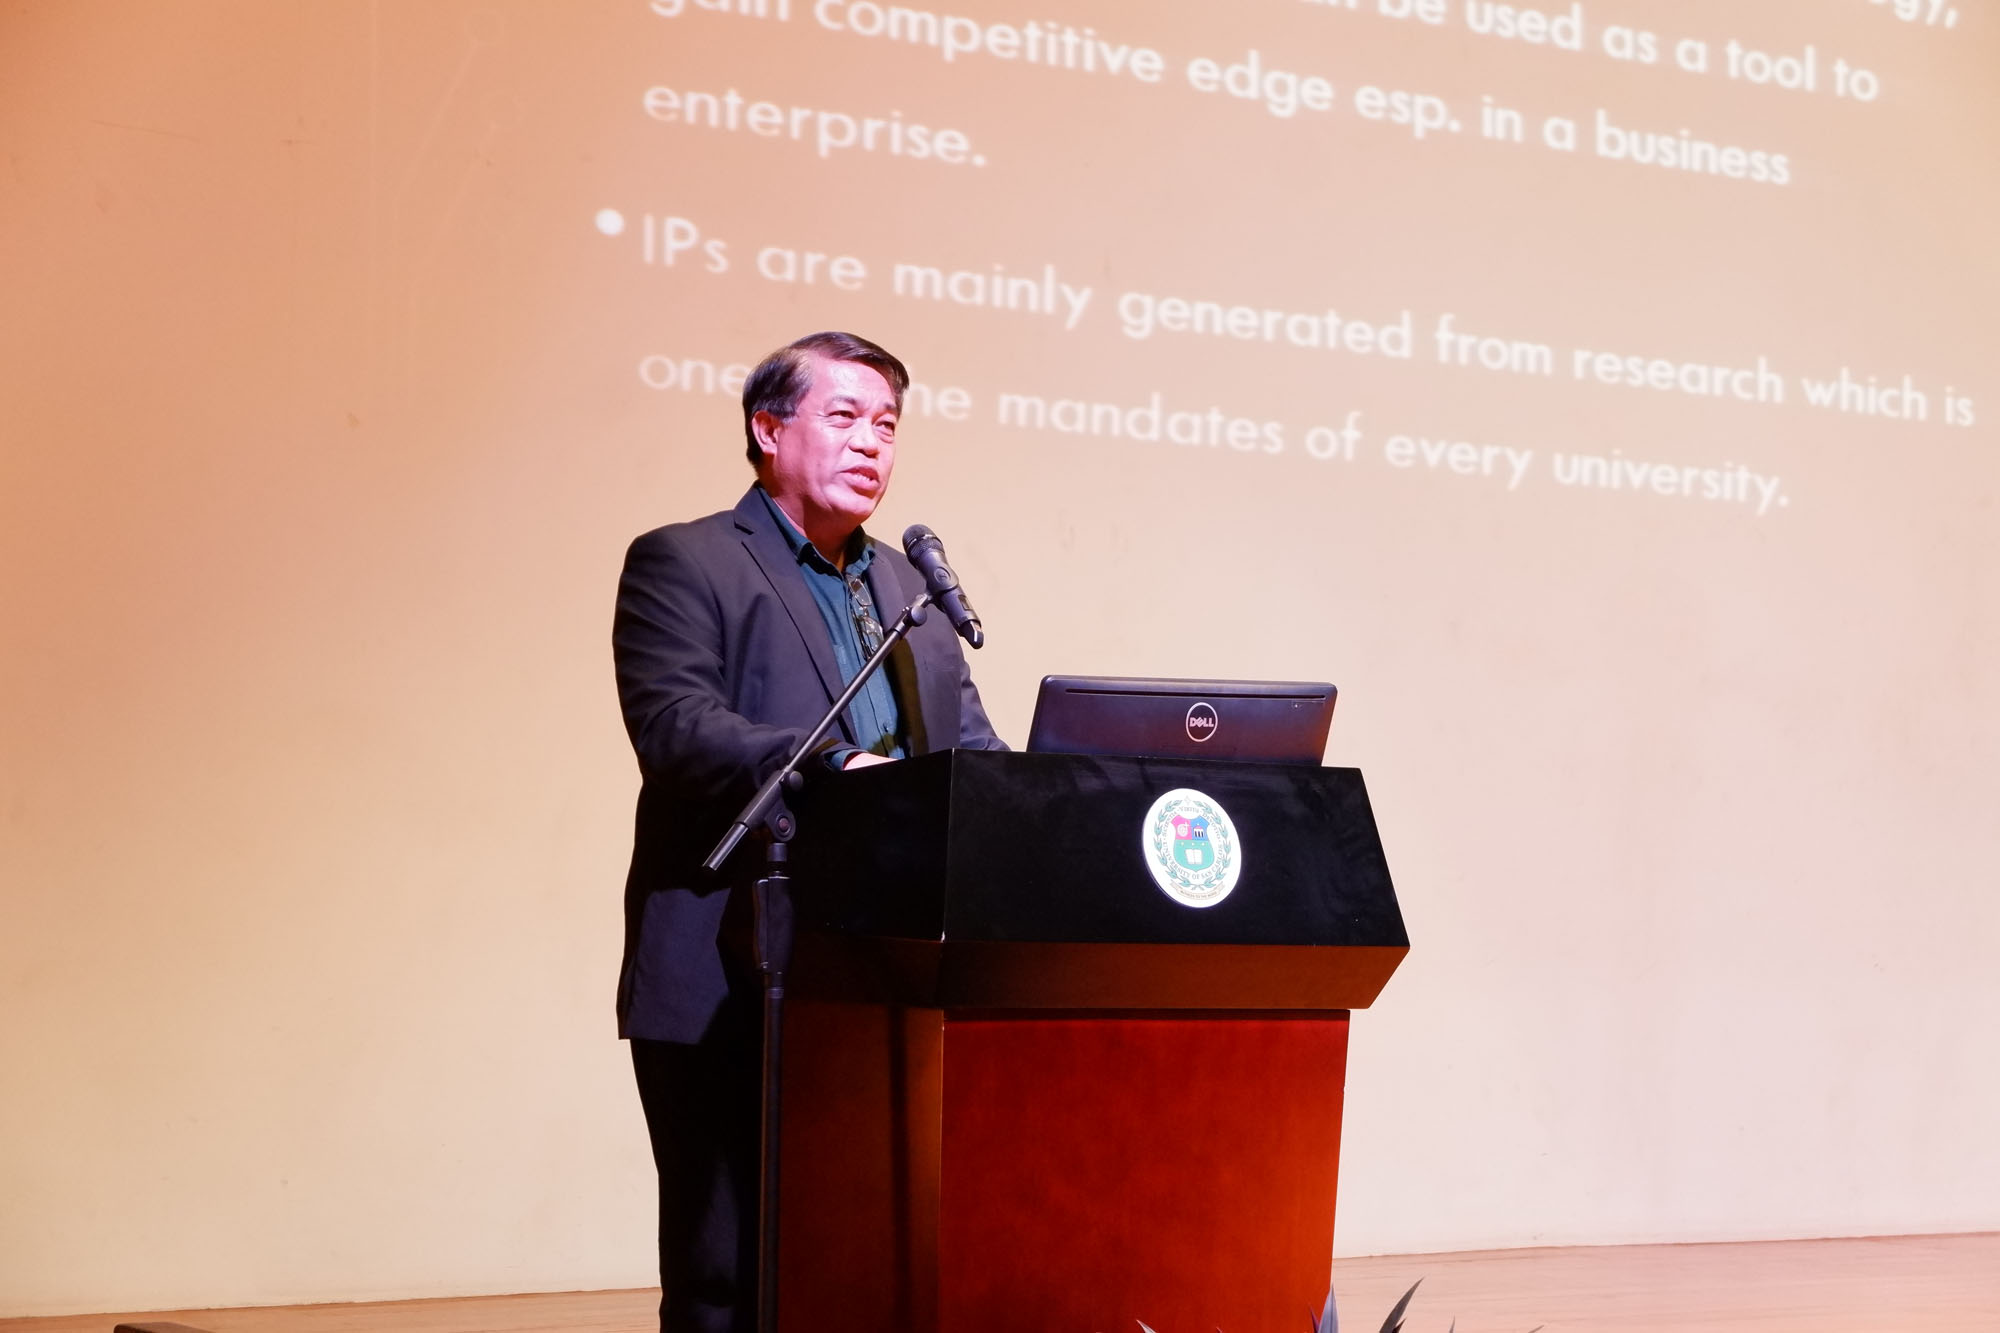 PASCN Regional Symposium on Disruptive Technologies: Opportunities, Challenges, and Risks-pascn-usc-30-20190123.jpg